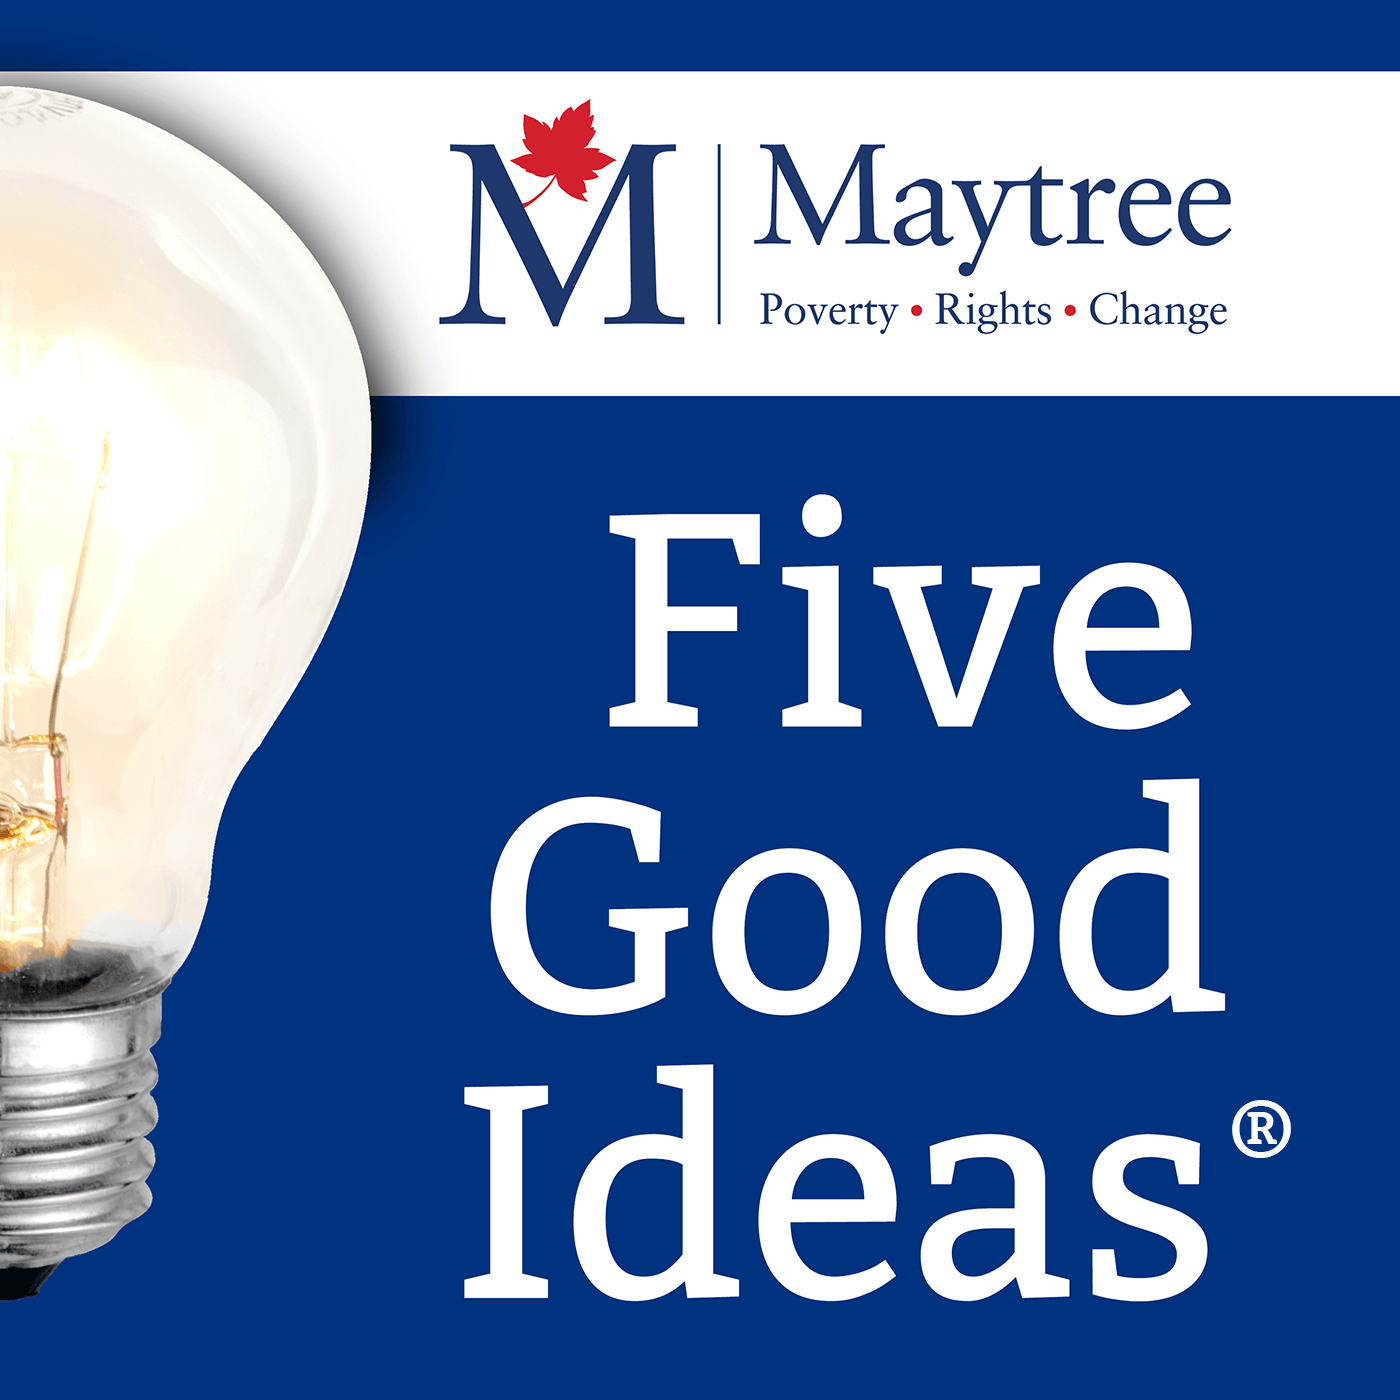 Five Good Ideas about reflexive leadership